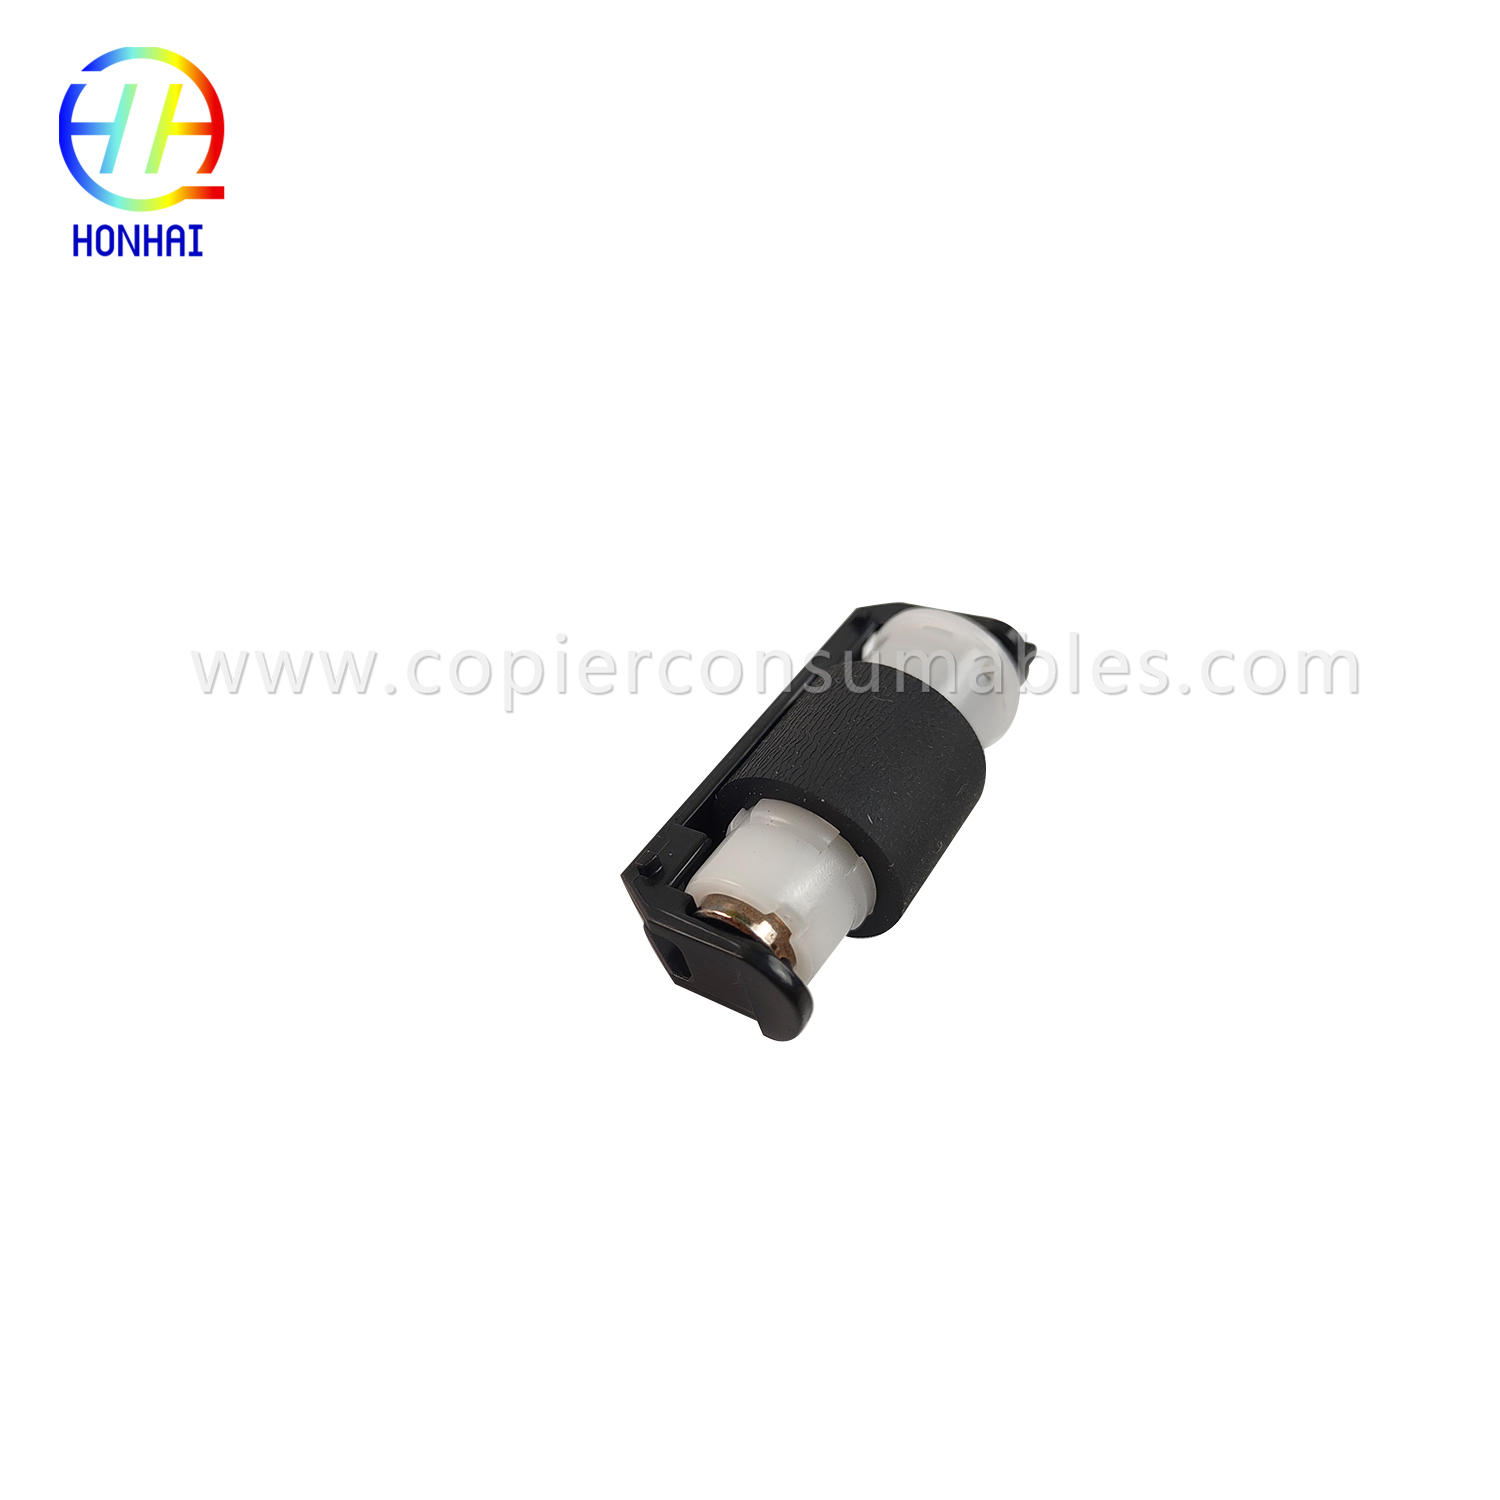 factory Outlets for Canon Imagerunner 525if - Separation Roller Assembly for HP CM1312 CM2320 CP2025 CP1215 CP1515 CP1518 CM1415 CP1525 RM14425000CN RM1-4425-000CN OEM – HONHAI